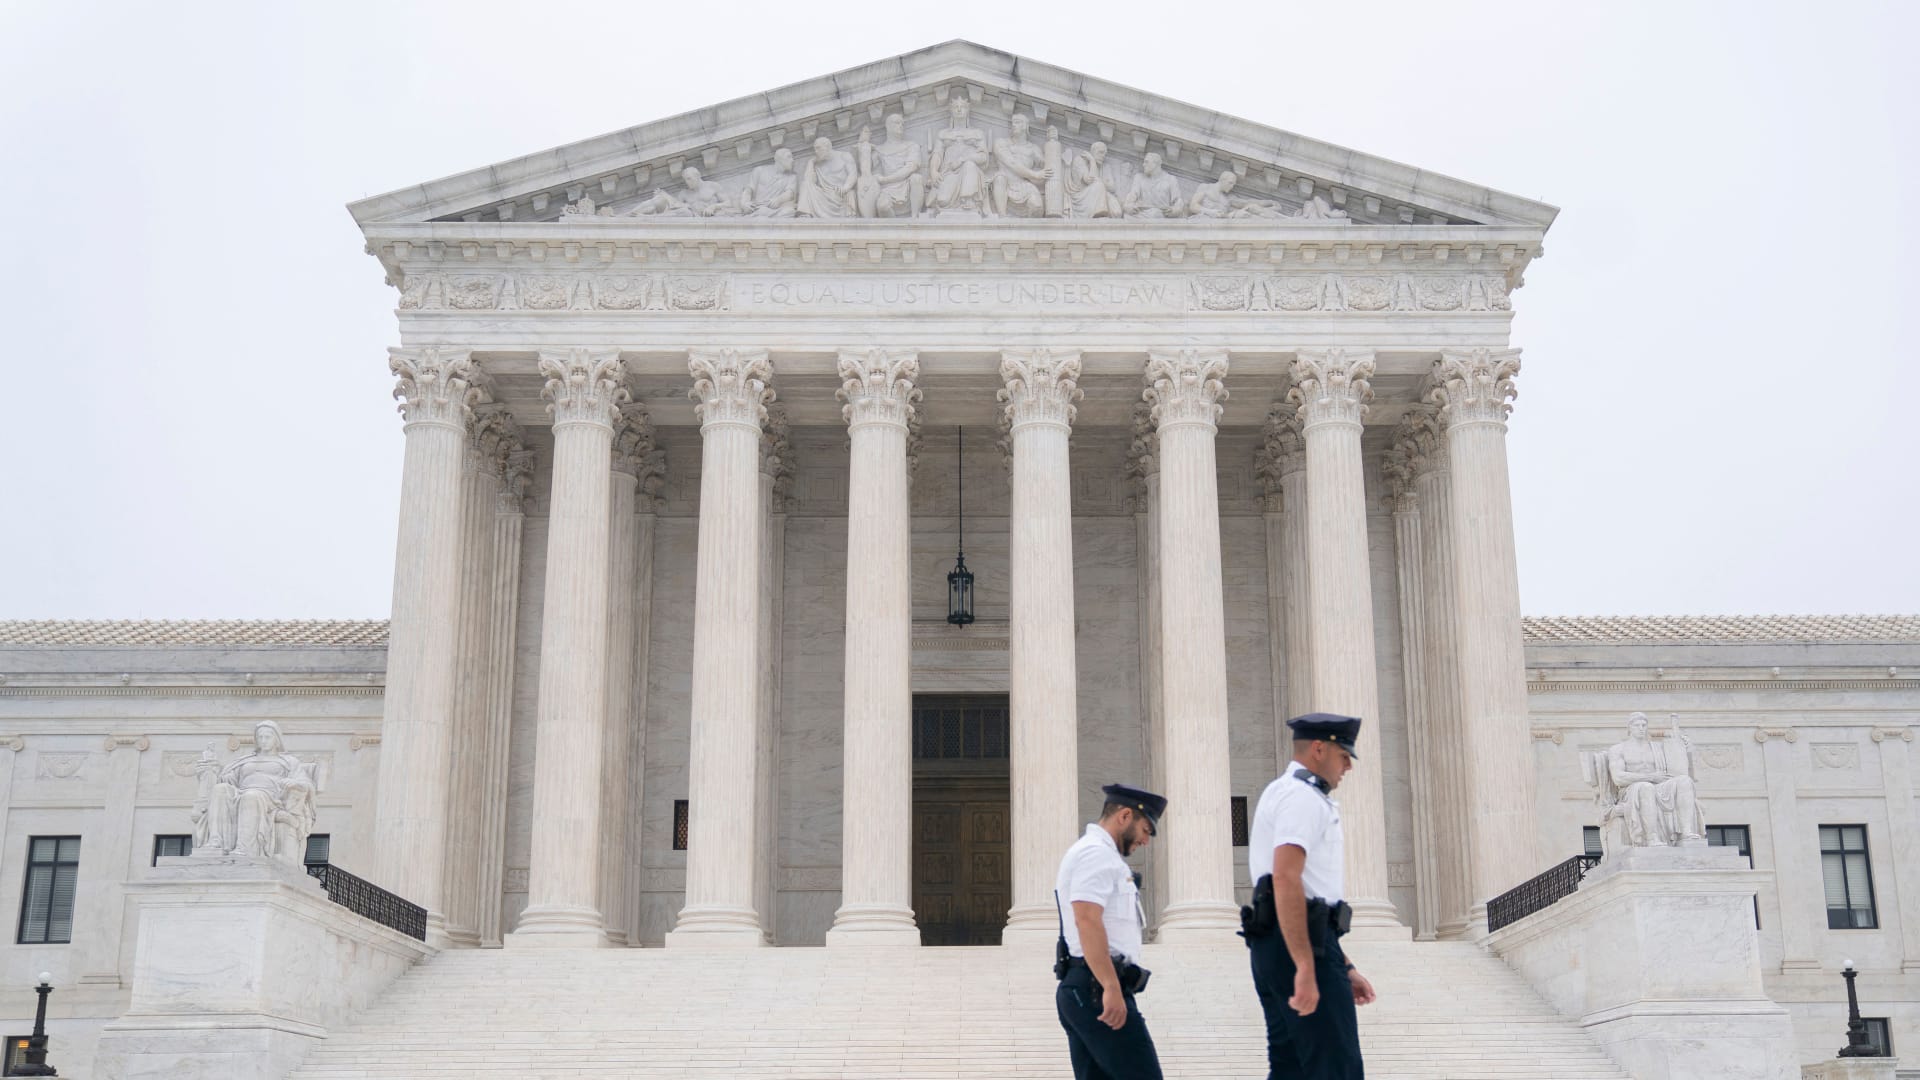 Police officers walk in front of the U.S. Supreme Court in Washington, D.C., on May 3, 2022.